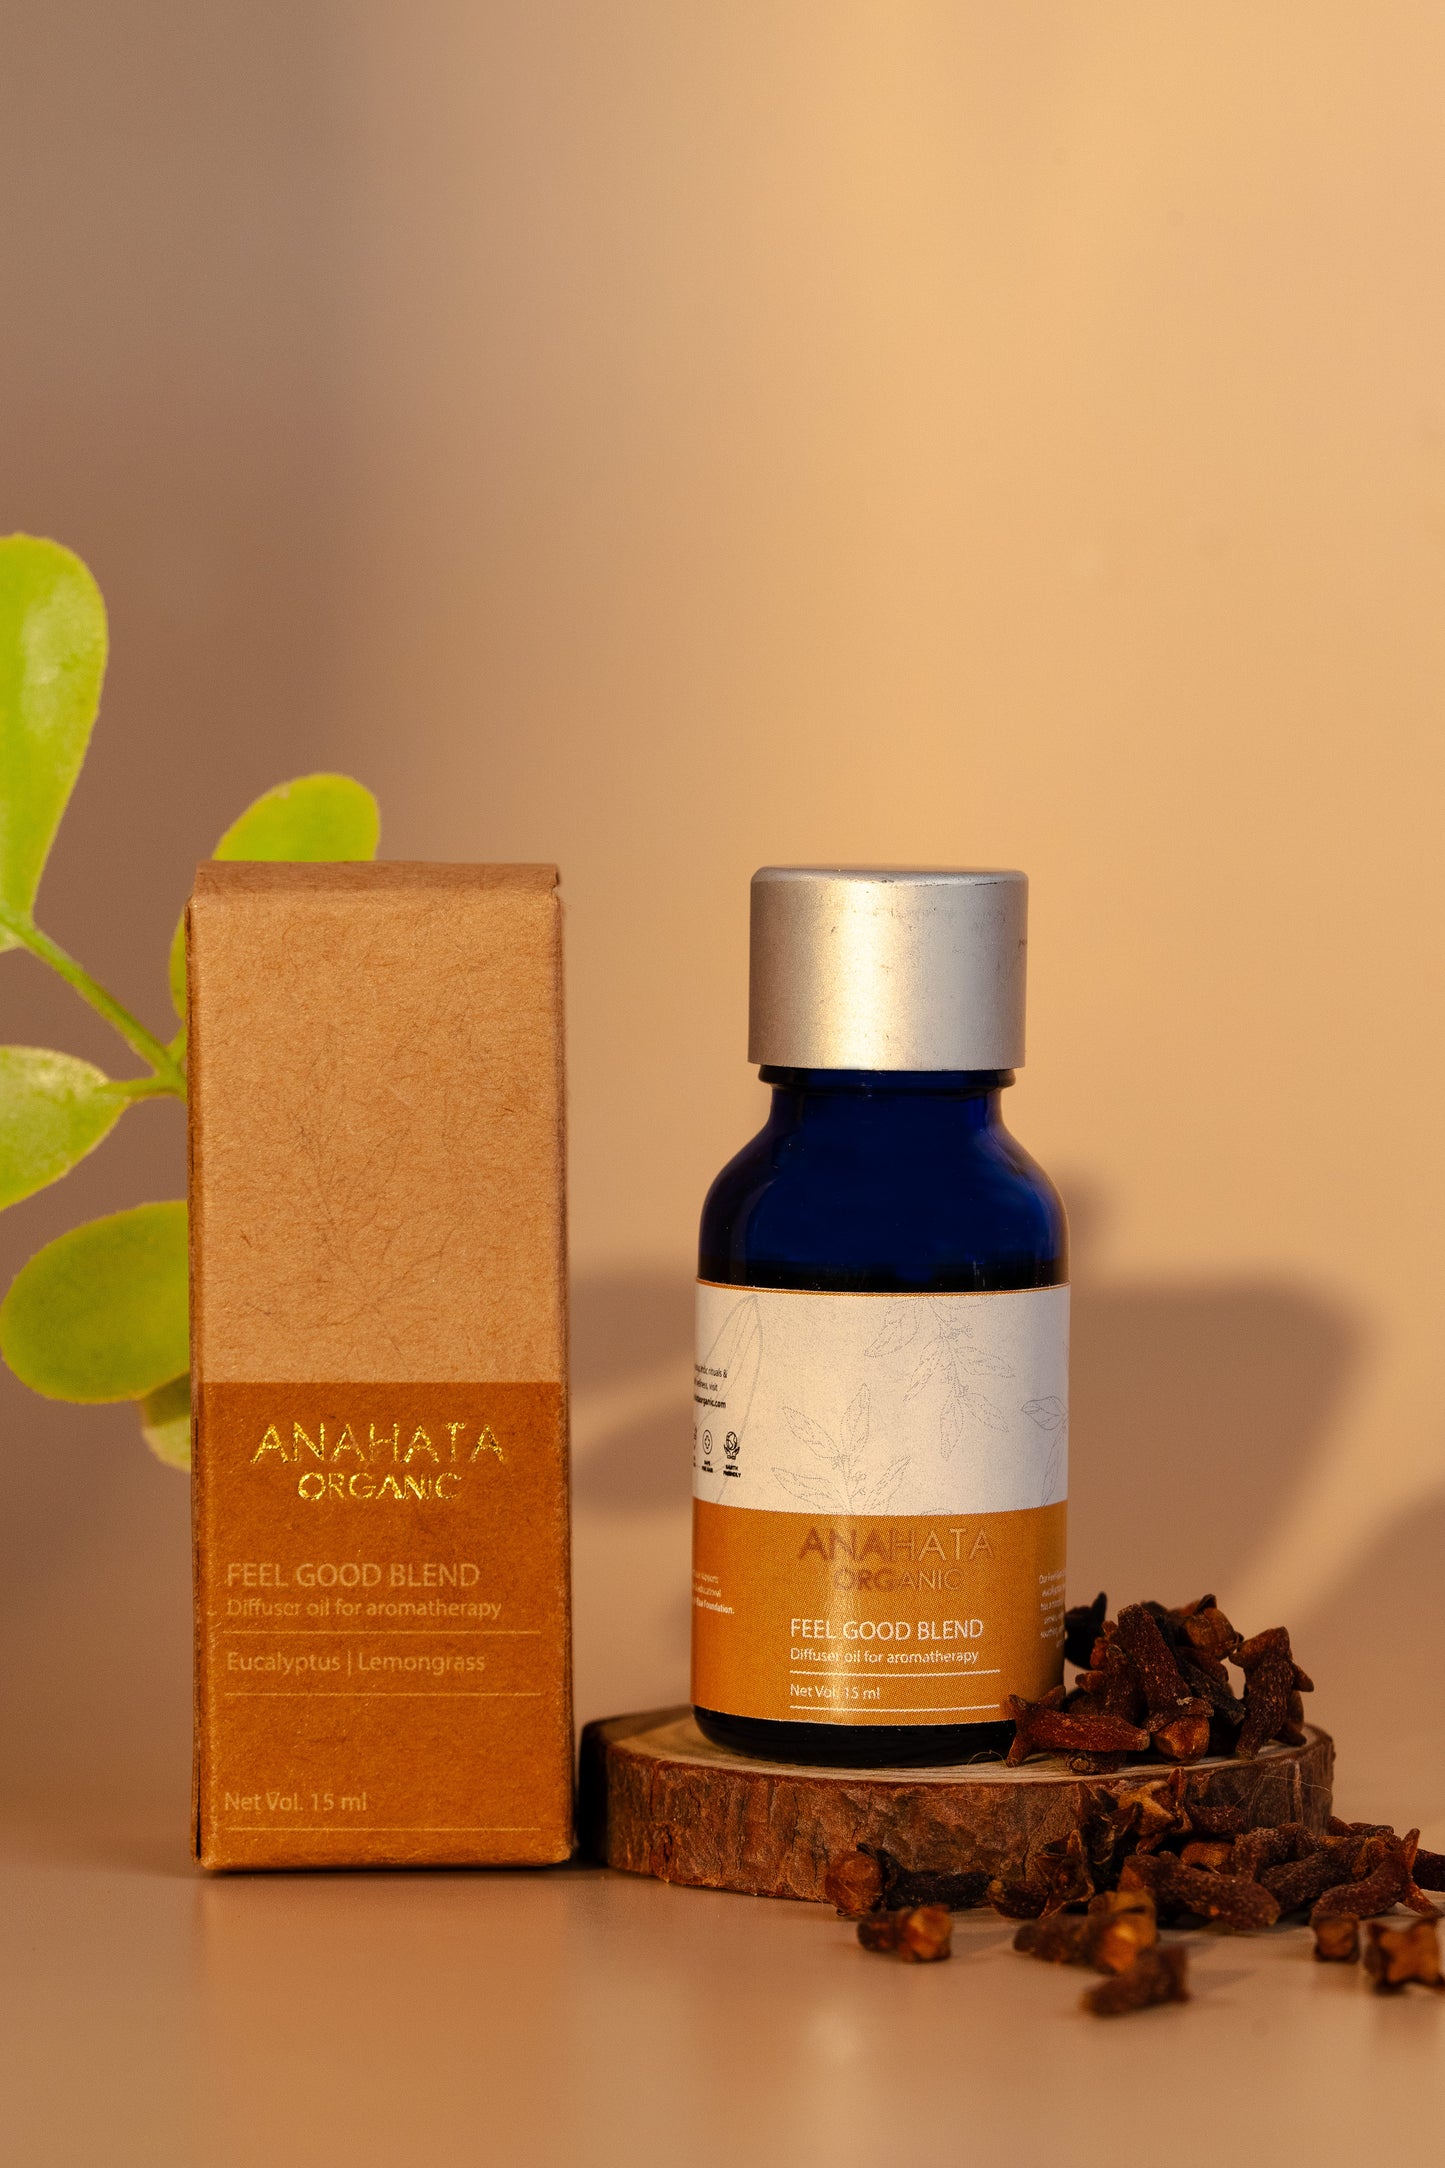 Feel Good Blend diffuser oil for aromatherapy - Anahata Organic